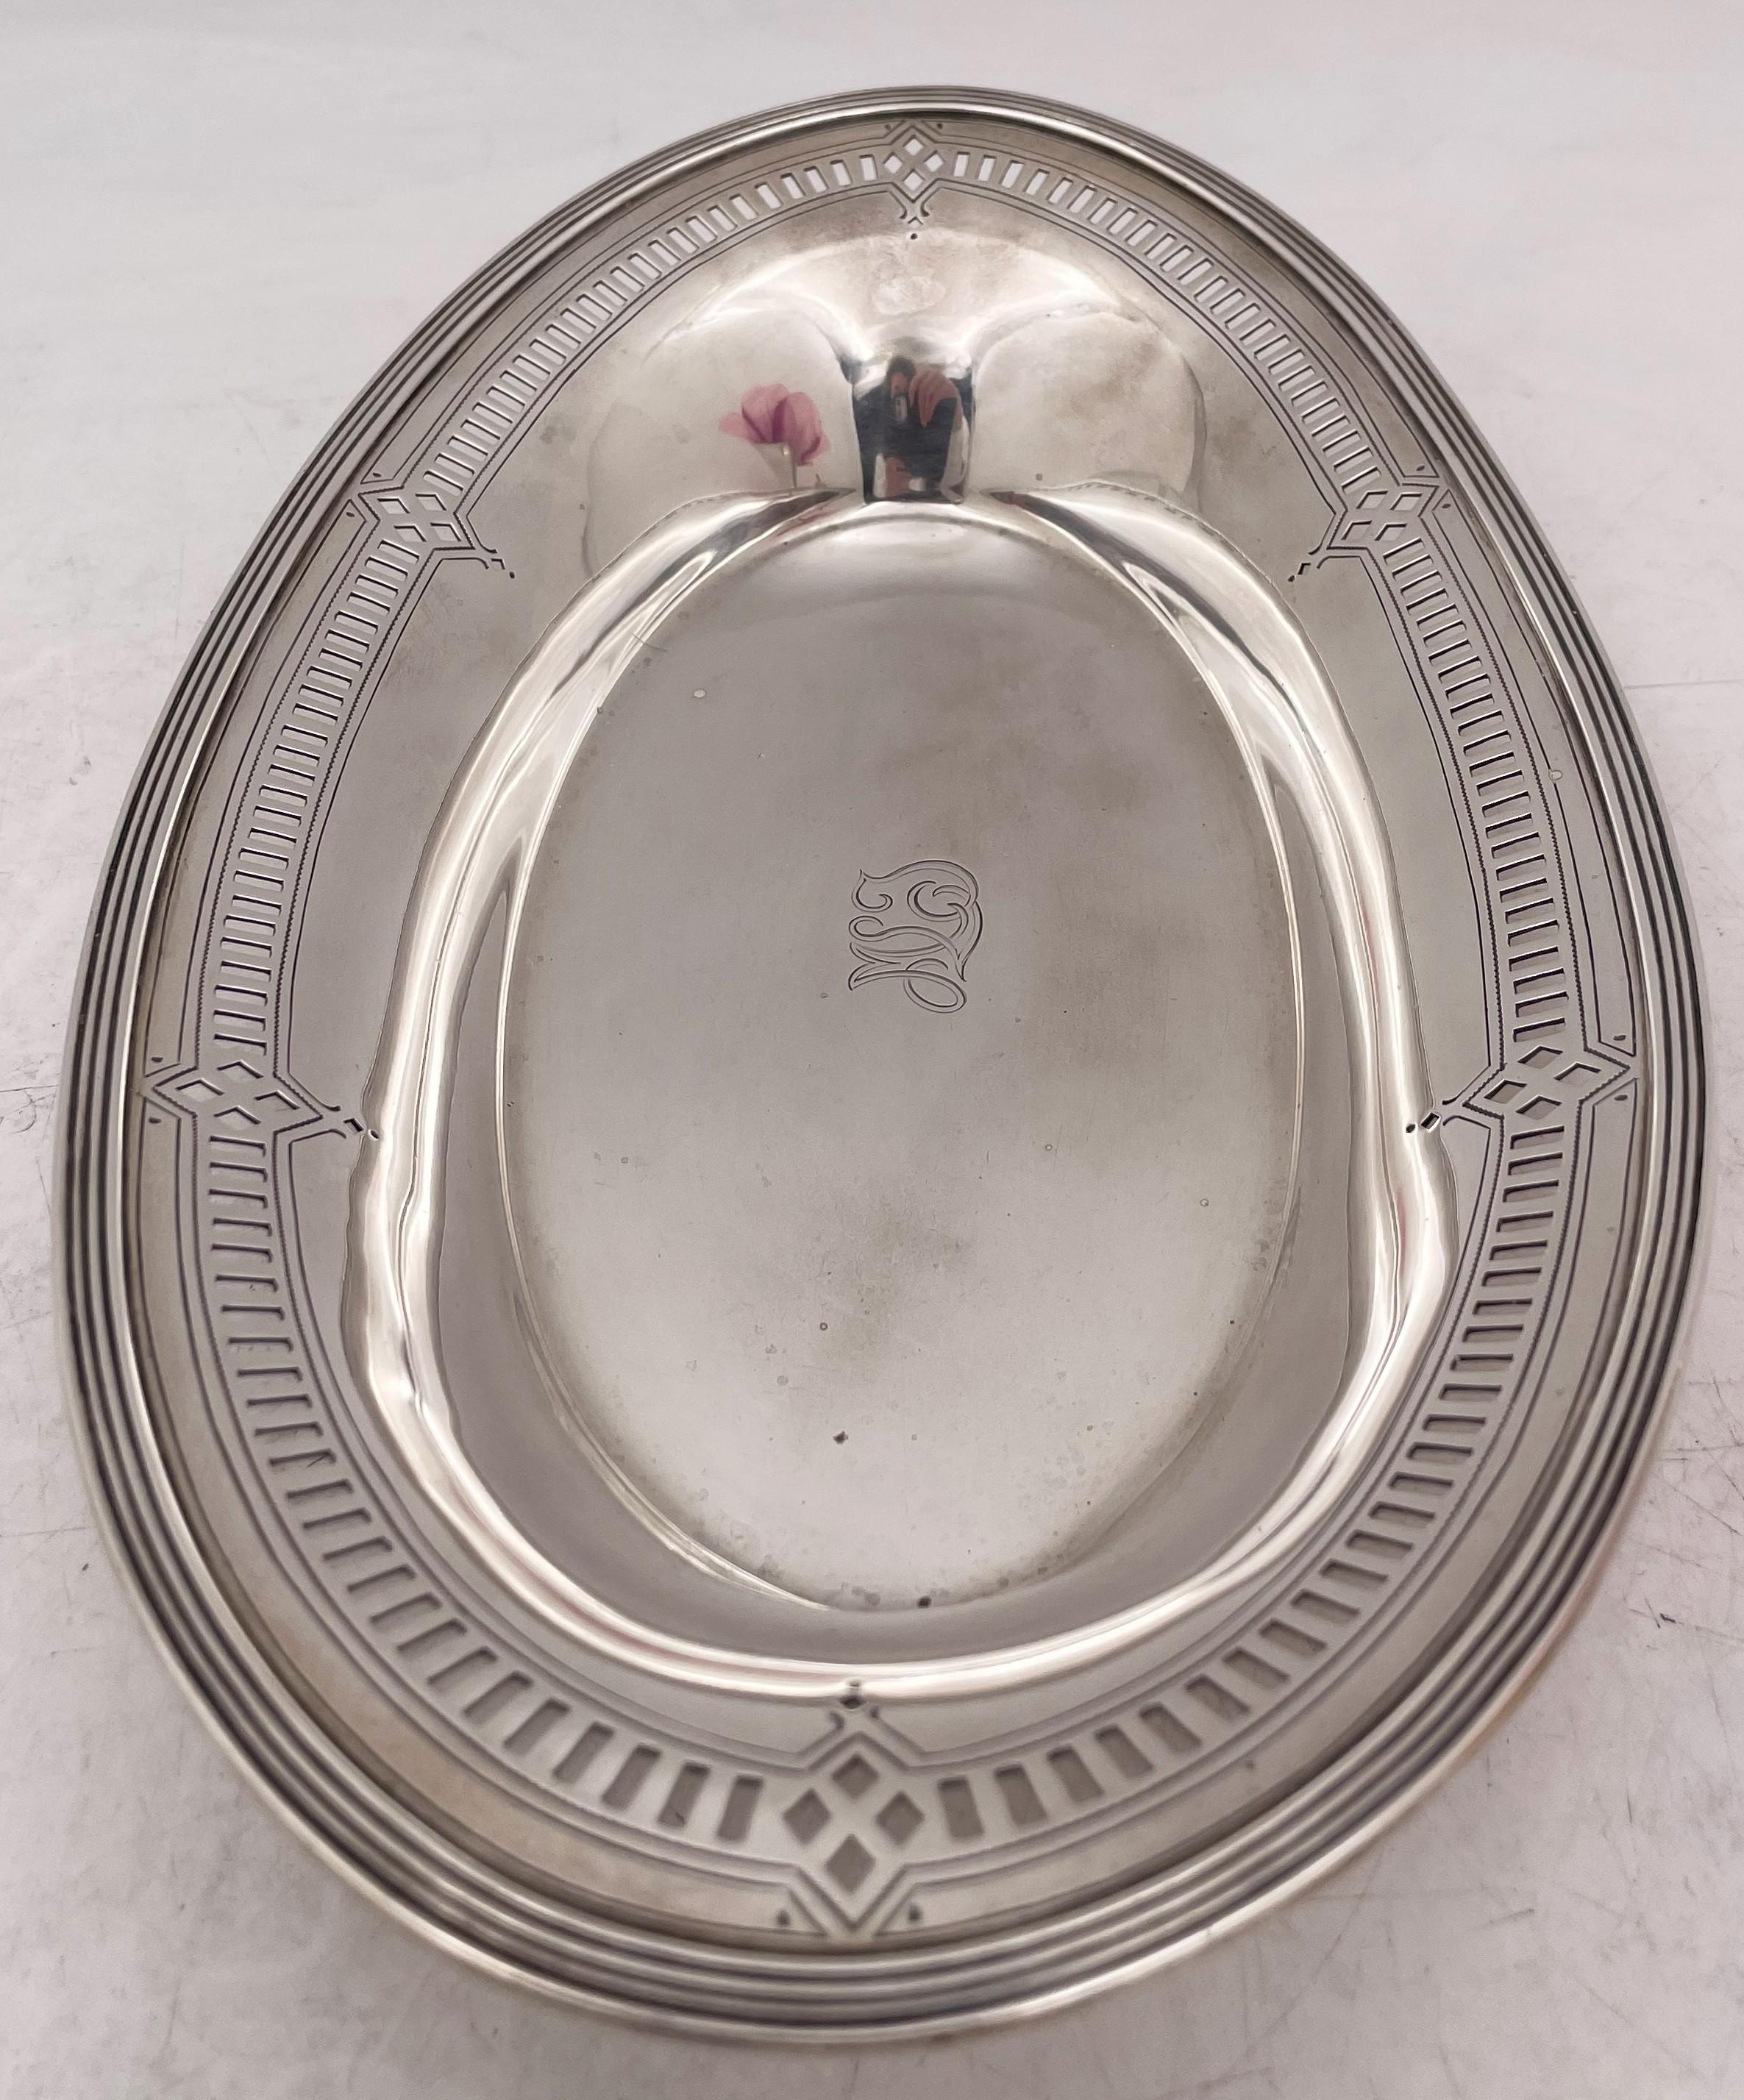 Tiffany & Co. Sterling Silver 1910 Pierced Bread Dish in Art Deco Style In Good Condition For Sale In New York, NY